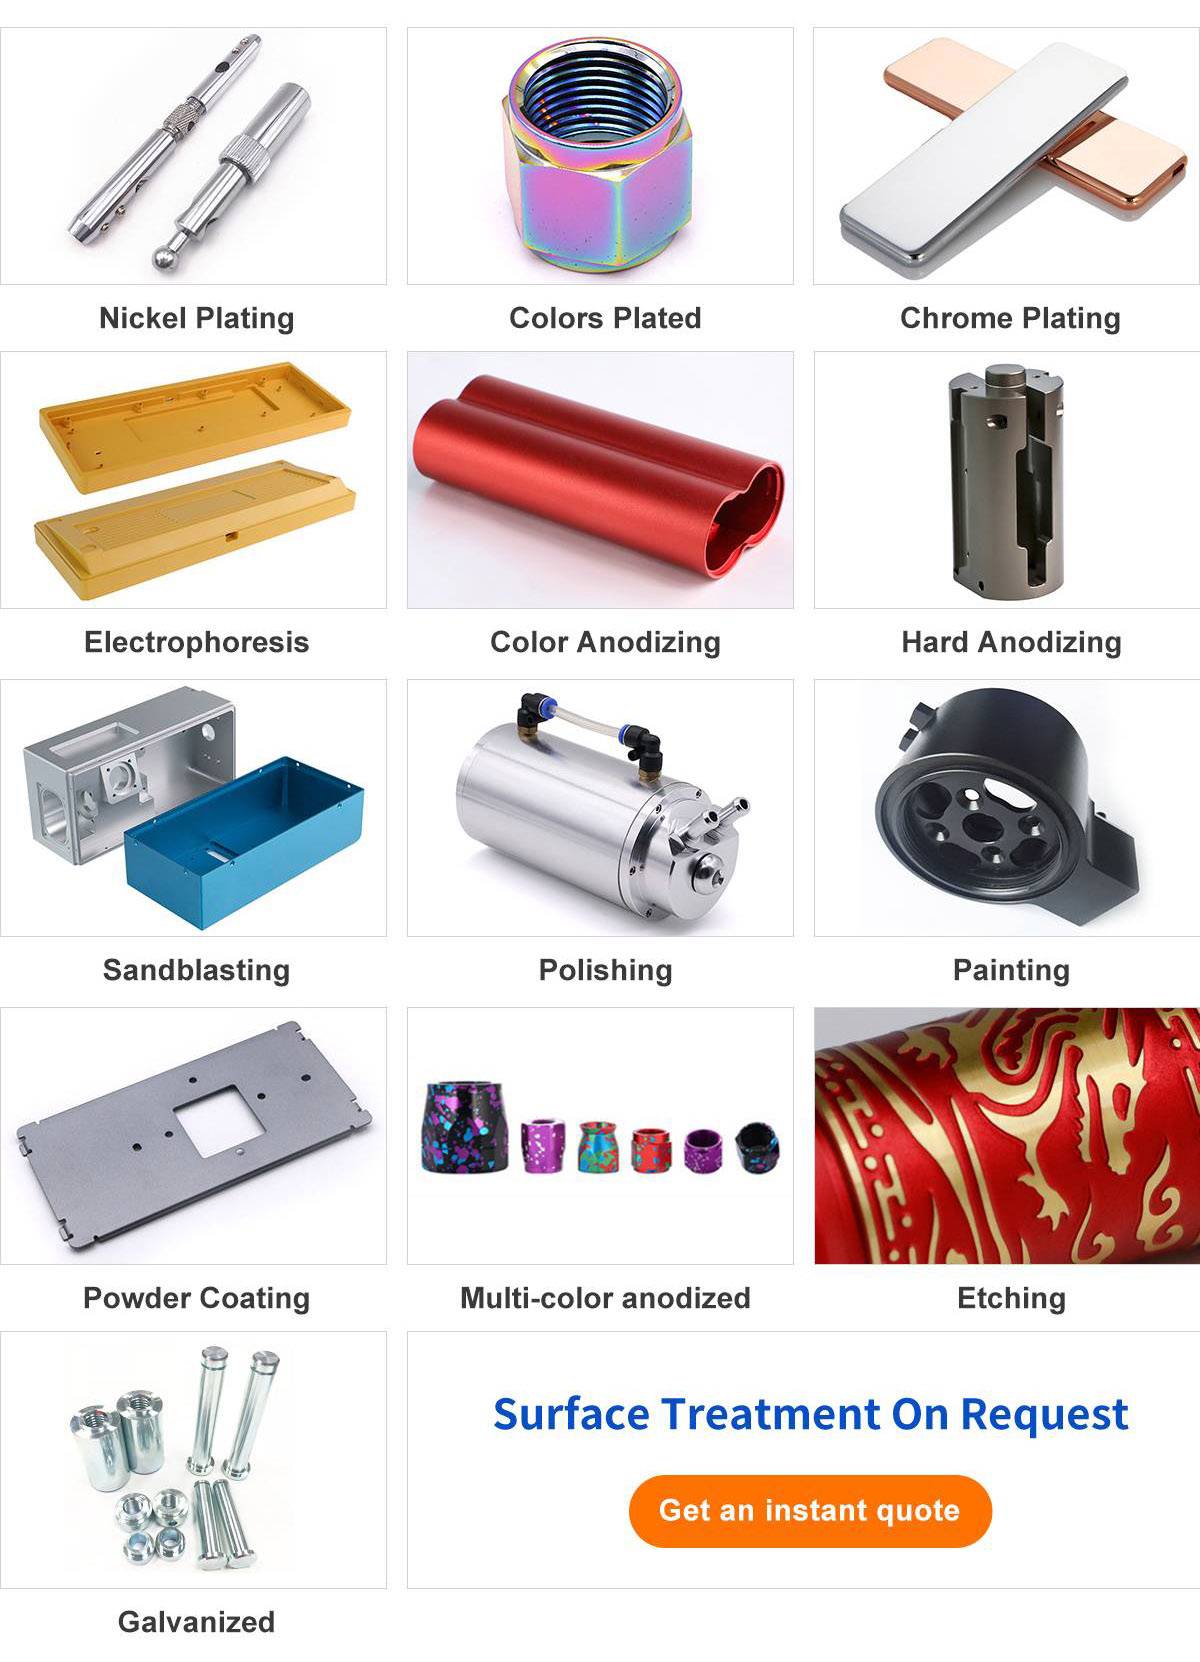 Value-added surface treatment services